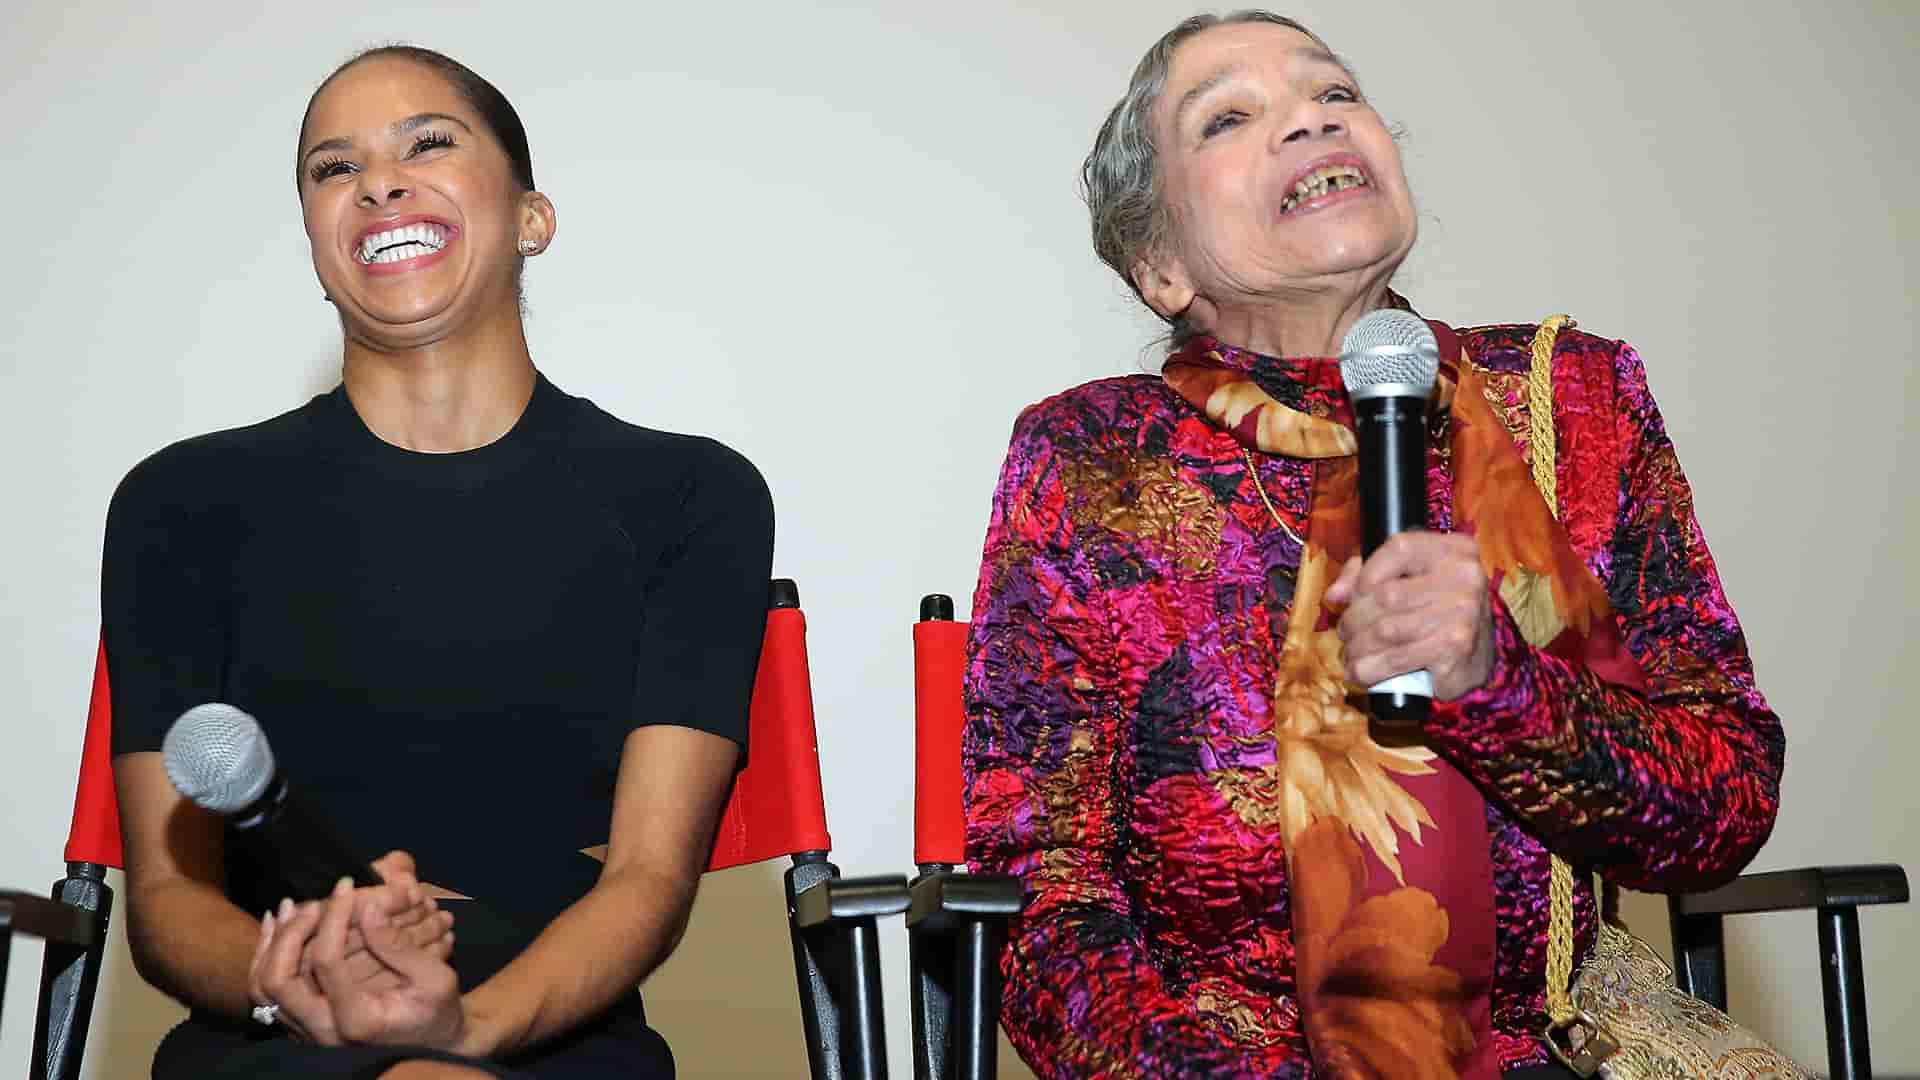 Image of Misty Copeland with her mother, Sylvia Dela Cerna